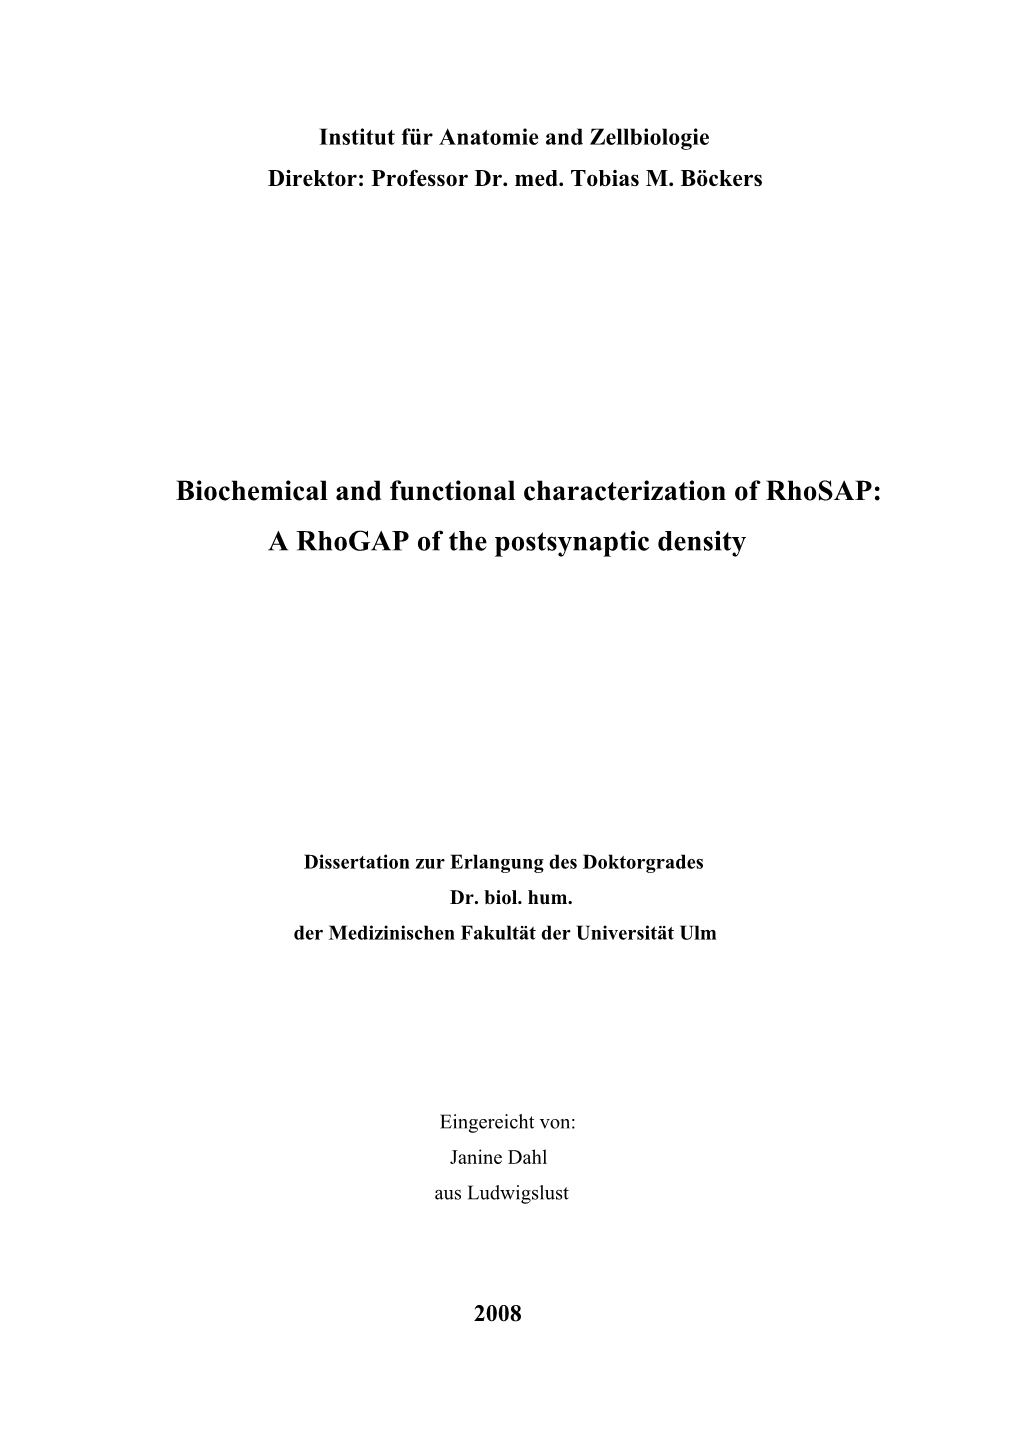 Biochemical and Functional Characterization of Rhosap: a Rhogap of the Postsynaptic Density